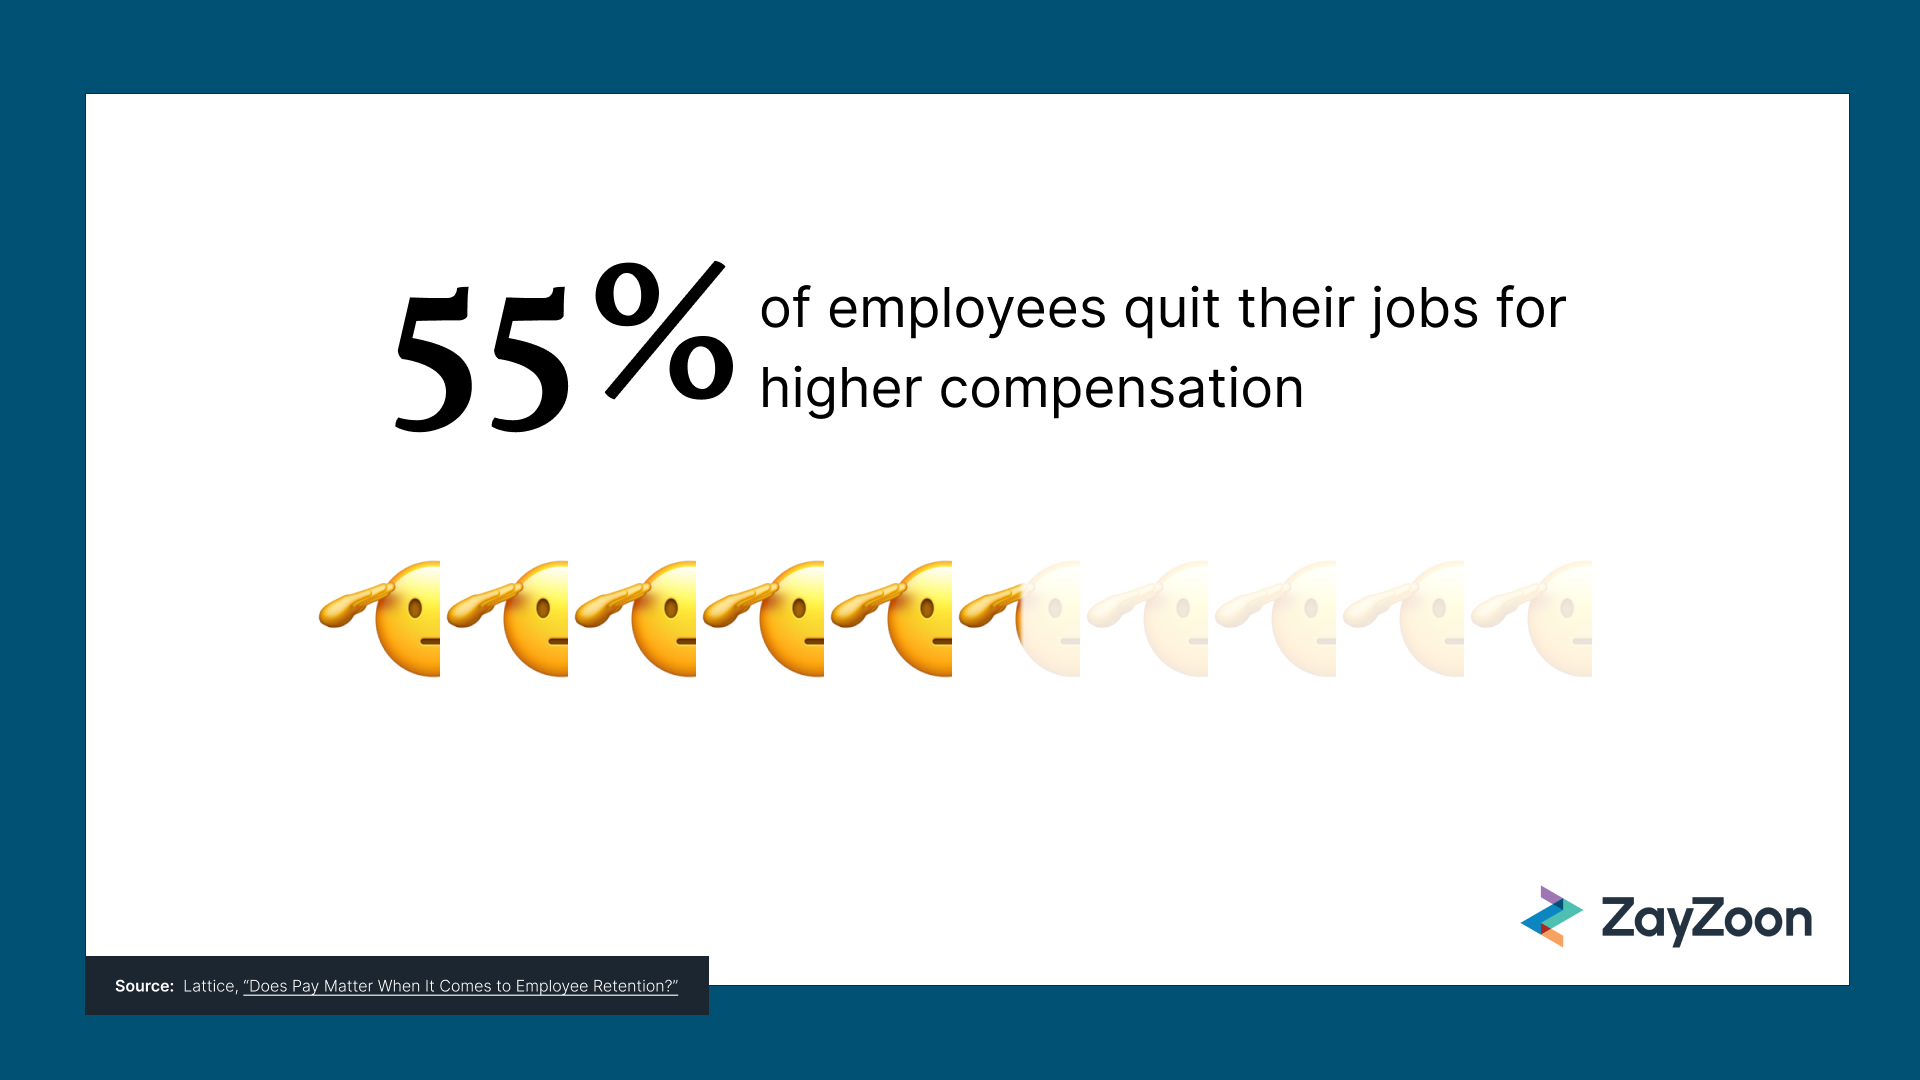 Saluting emojis with copy that reads: "55% of employees leave their current role for one with higher compensation."